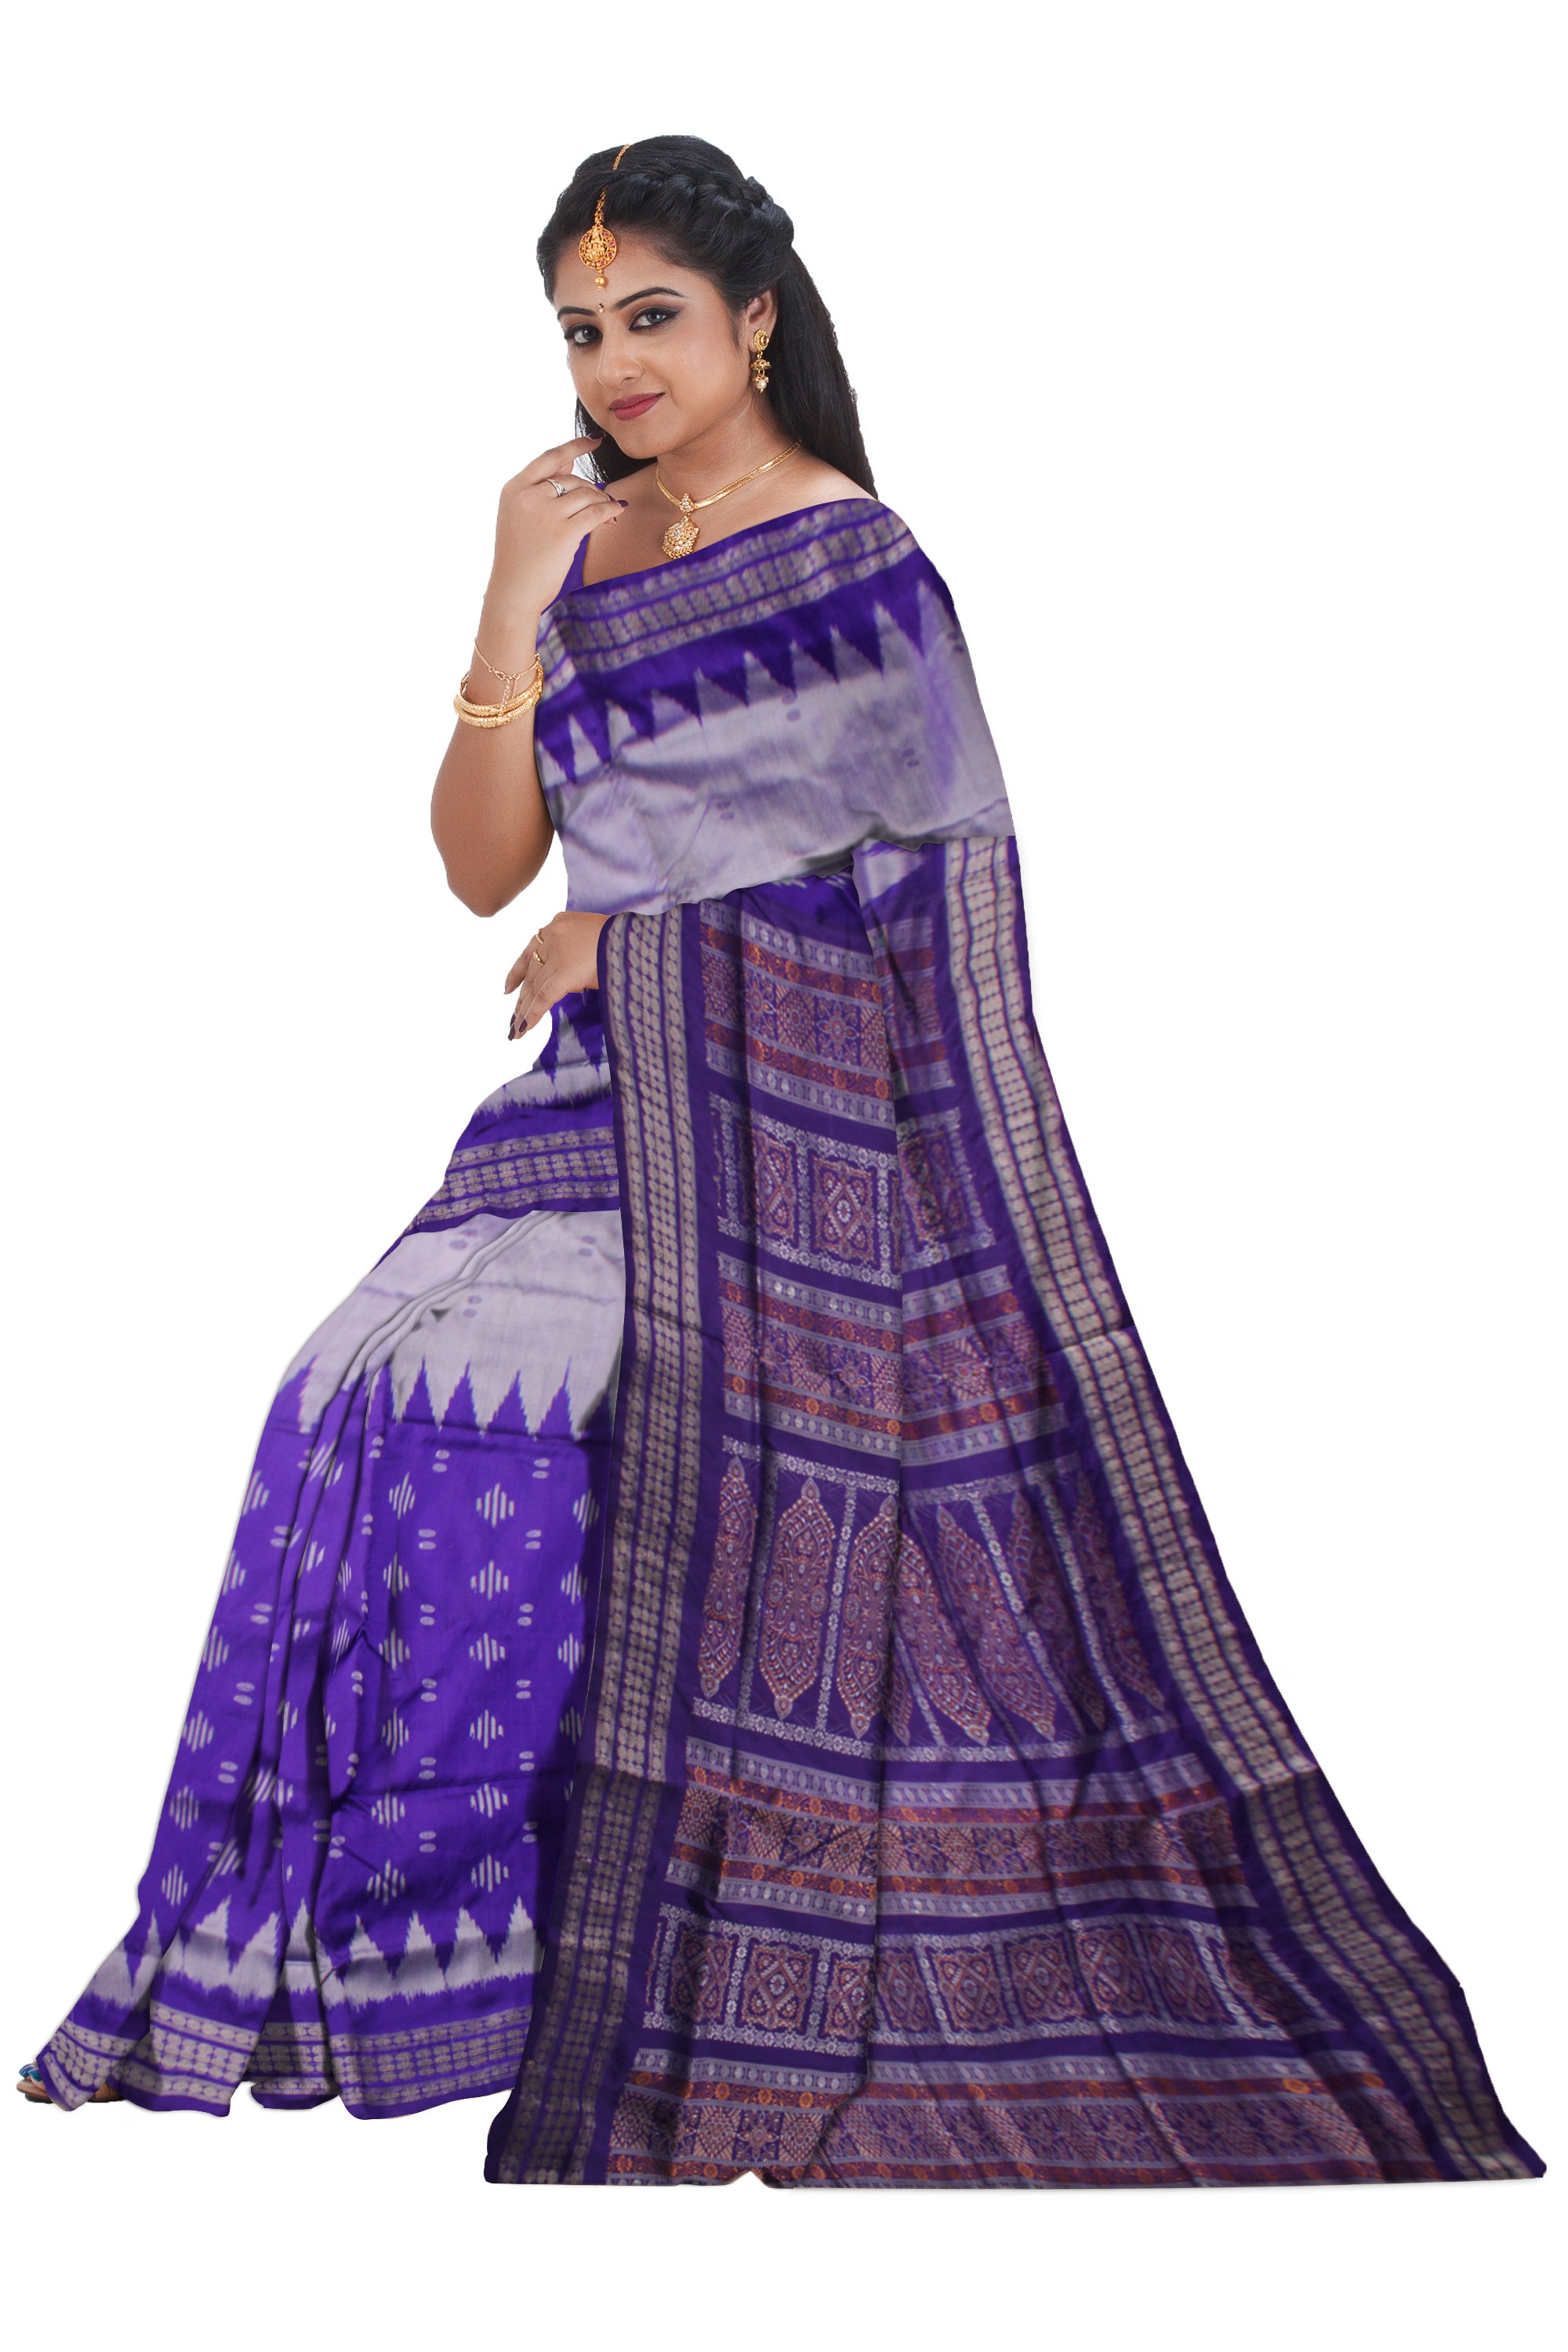 SILVER AND PURPLE COLOR IKAT PATTERN PATA SAREE, COMES WITH MATCHING BLOUSE PIECE. - Koshali Arts & Crafts Enterprise